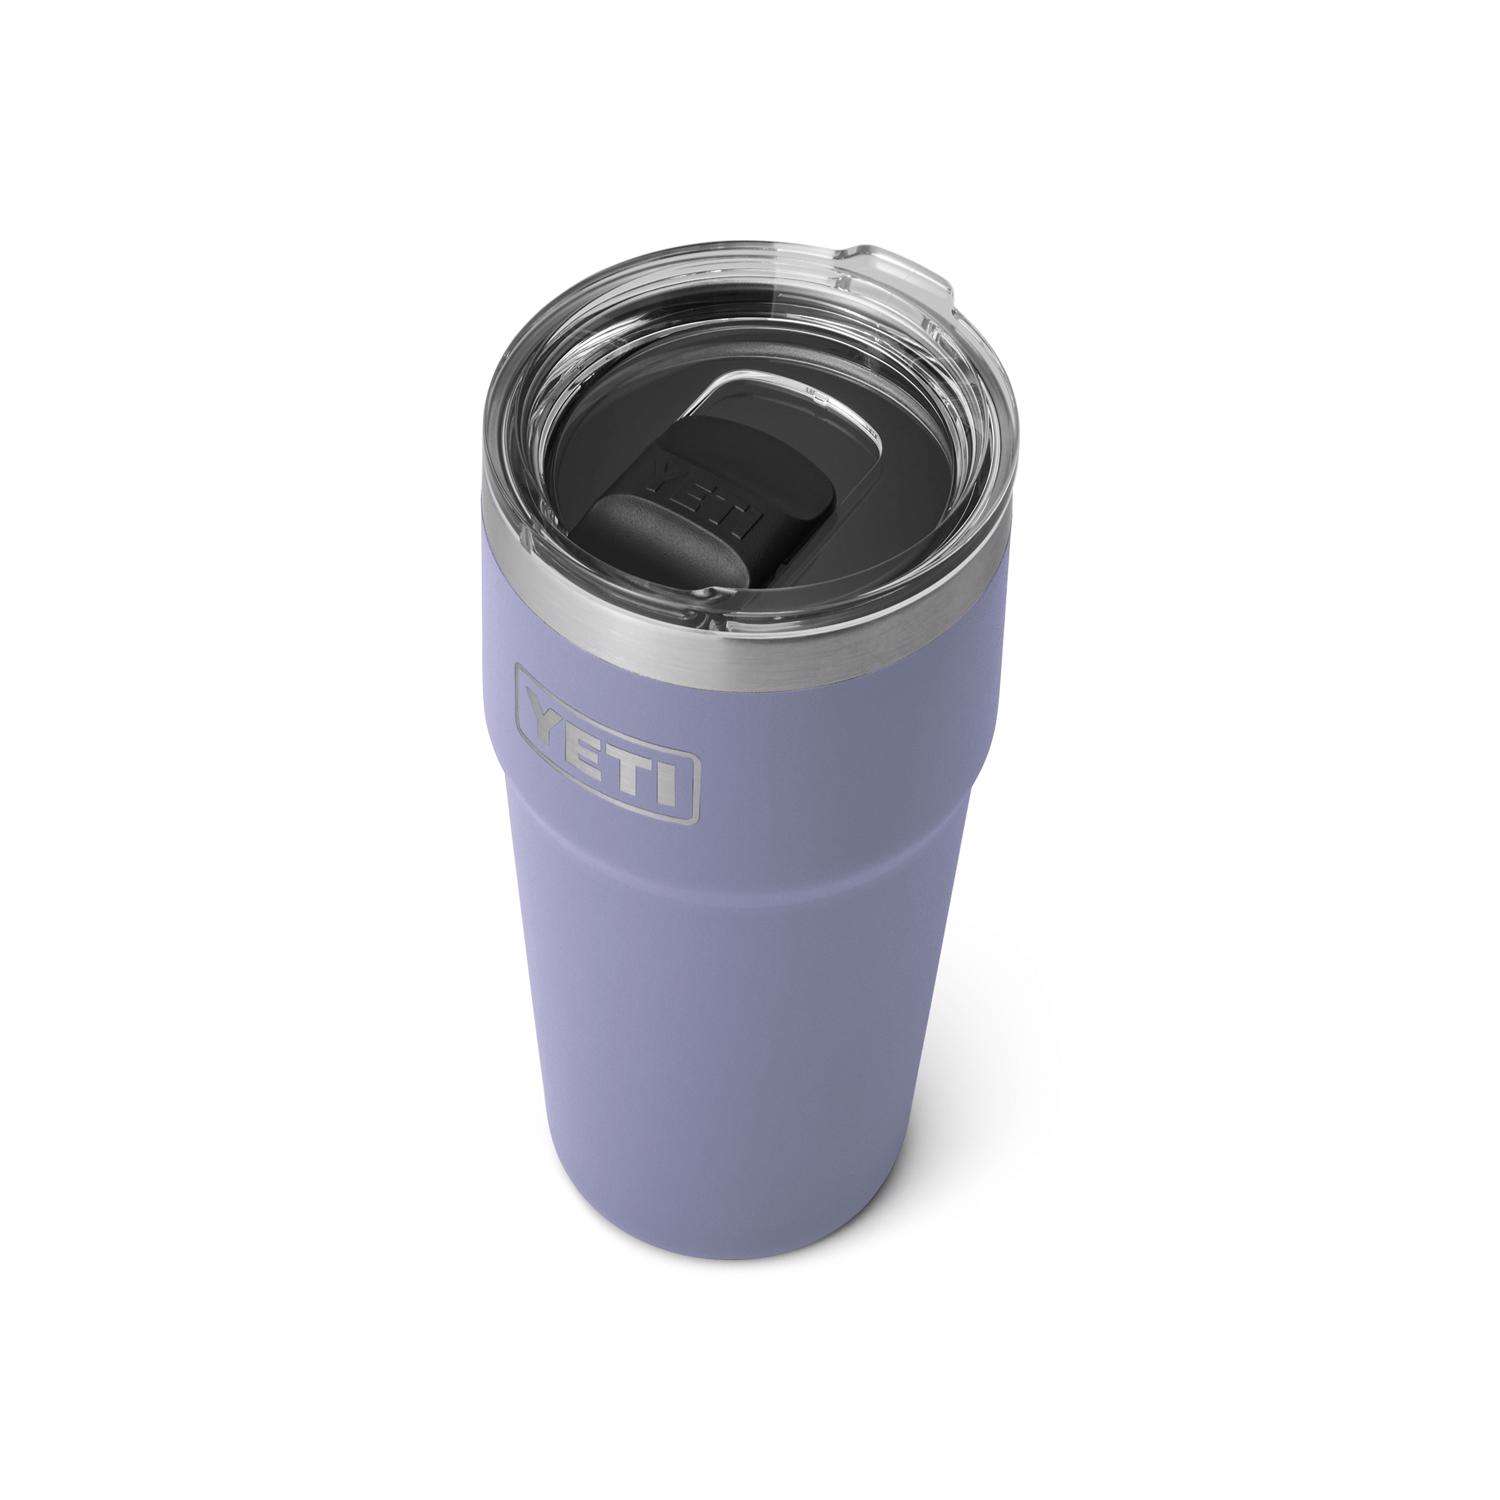 Yeti Rambler 16 oz Stackable Pint with Magslider Lid Charcoal